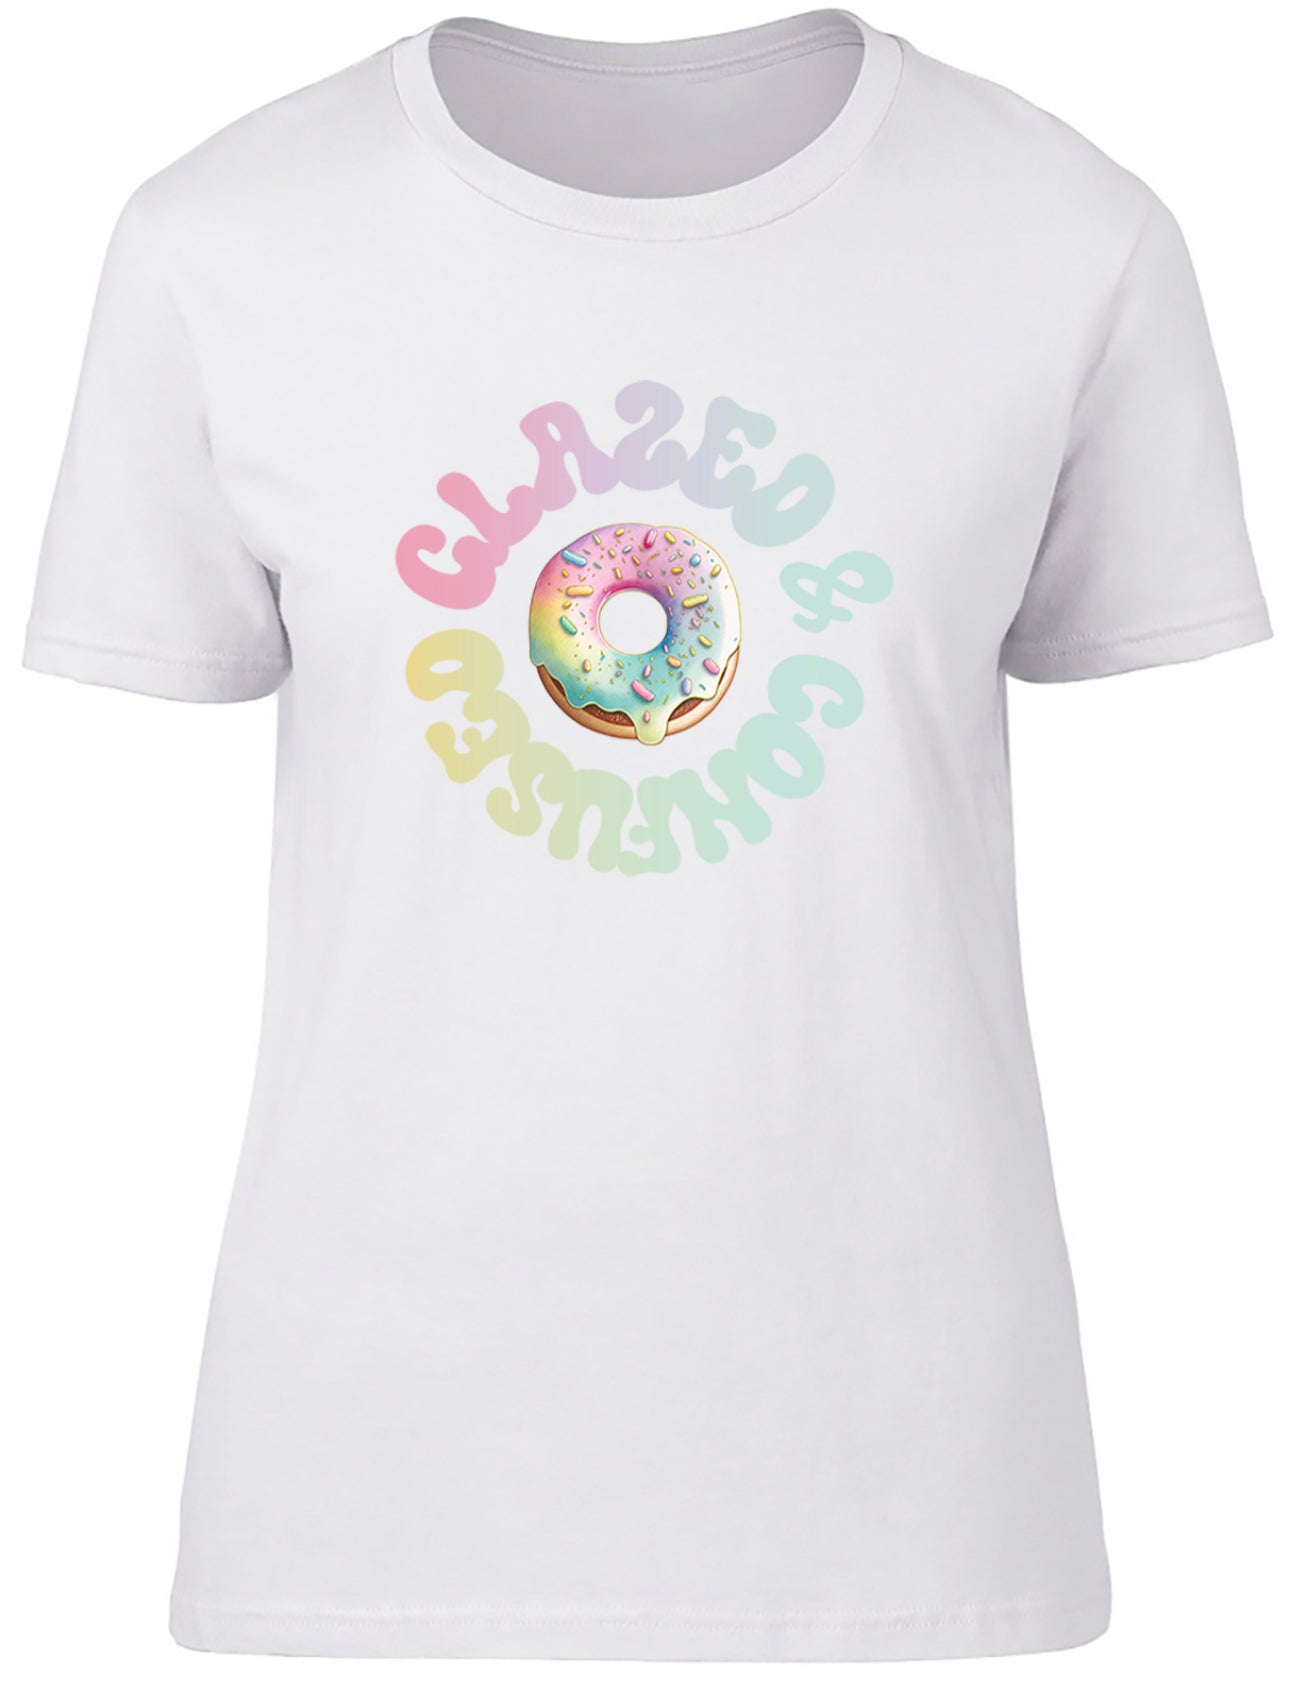 Glazed and Confused Women’s T-shirt